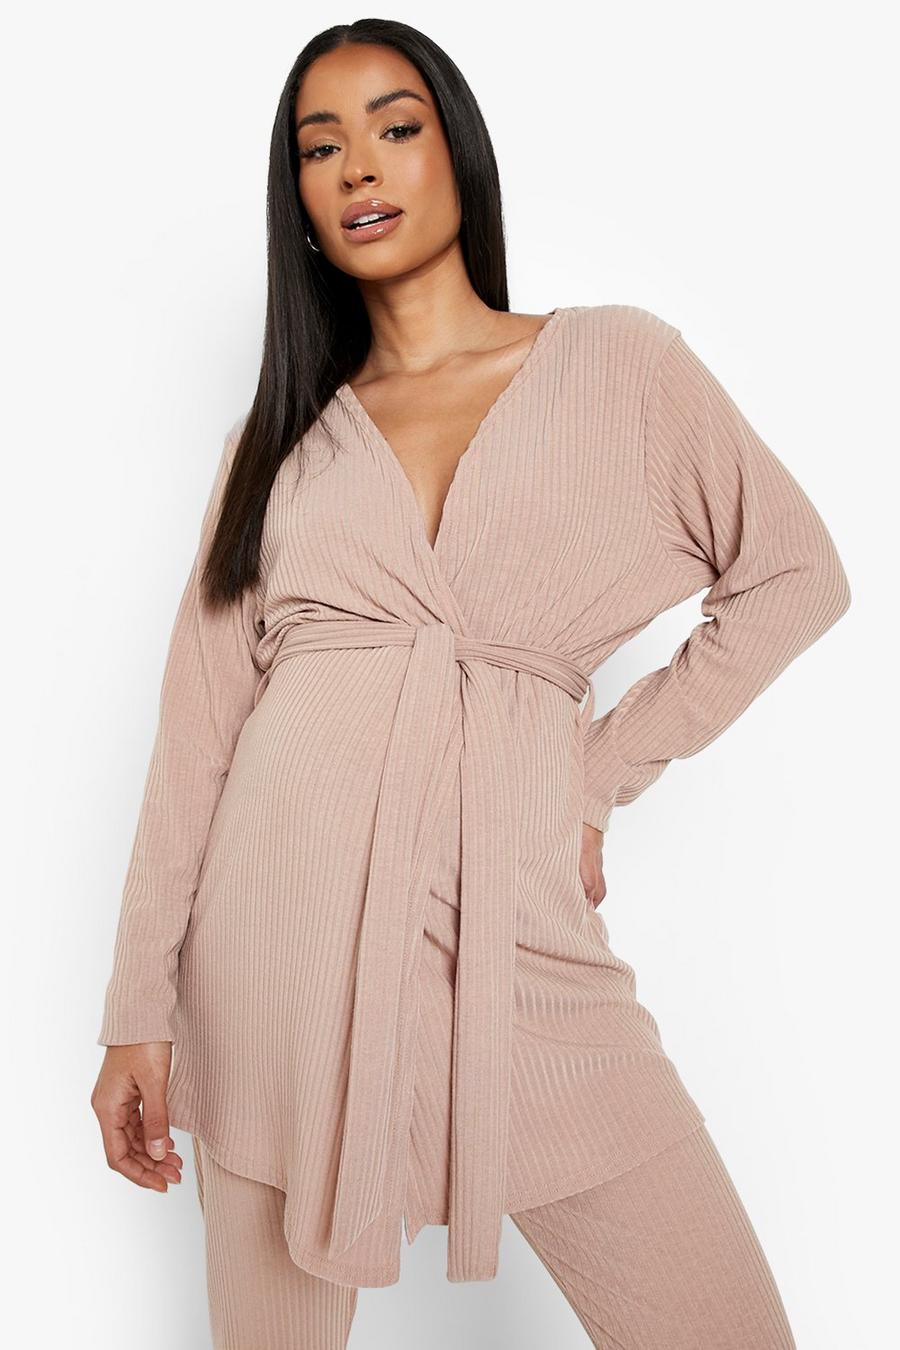 Stone beis Maternity Wrap Top And Joggers Loungewear Set